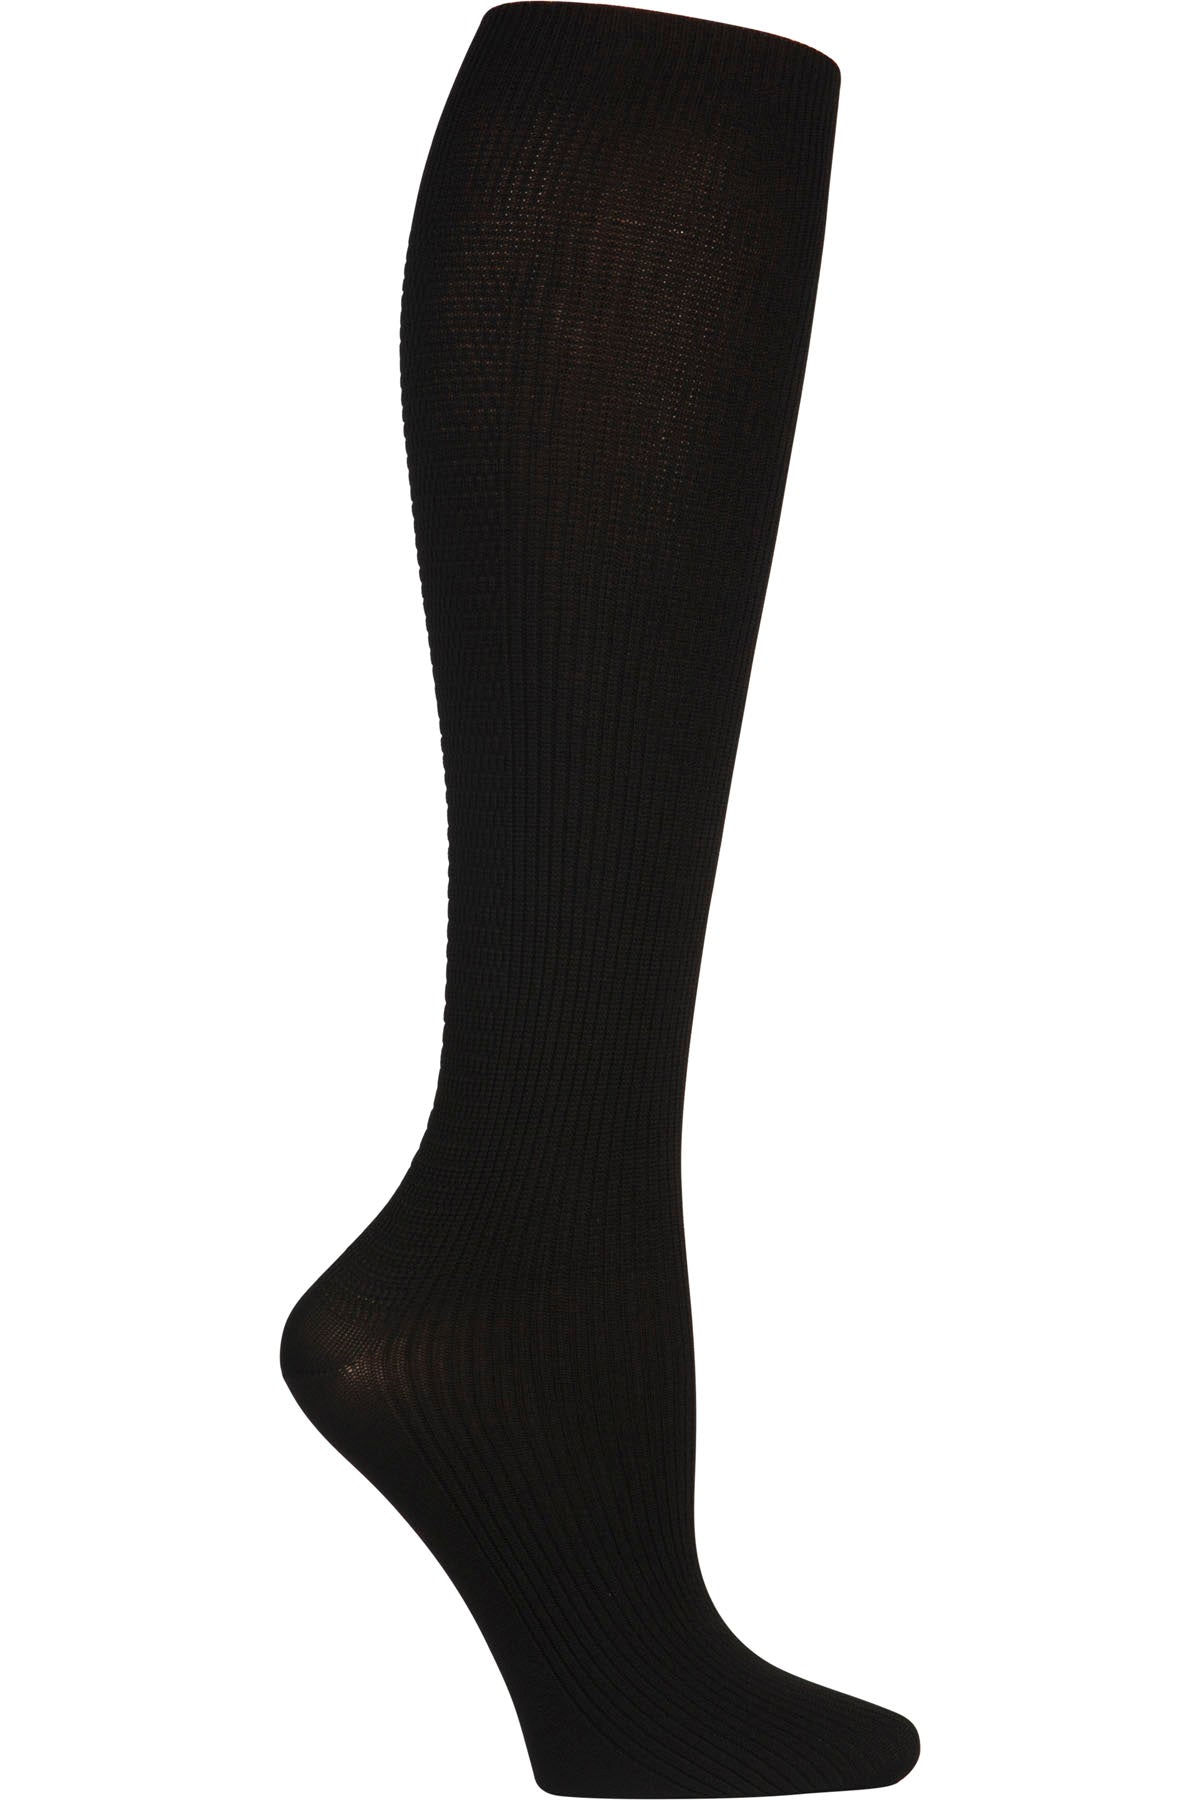 Cherokee Mild Compression Support Socks 8-12 mmHg in Black at Parker's Clothing and Shoes.